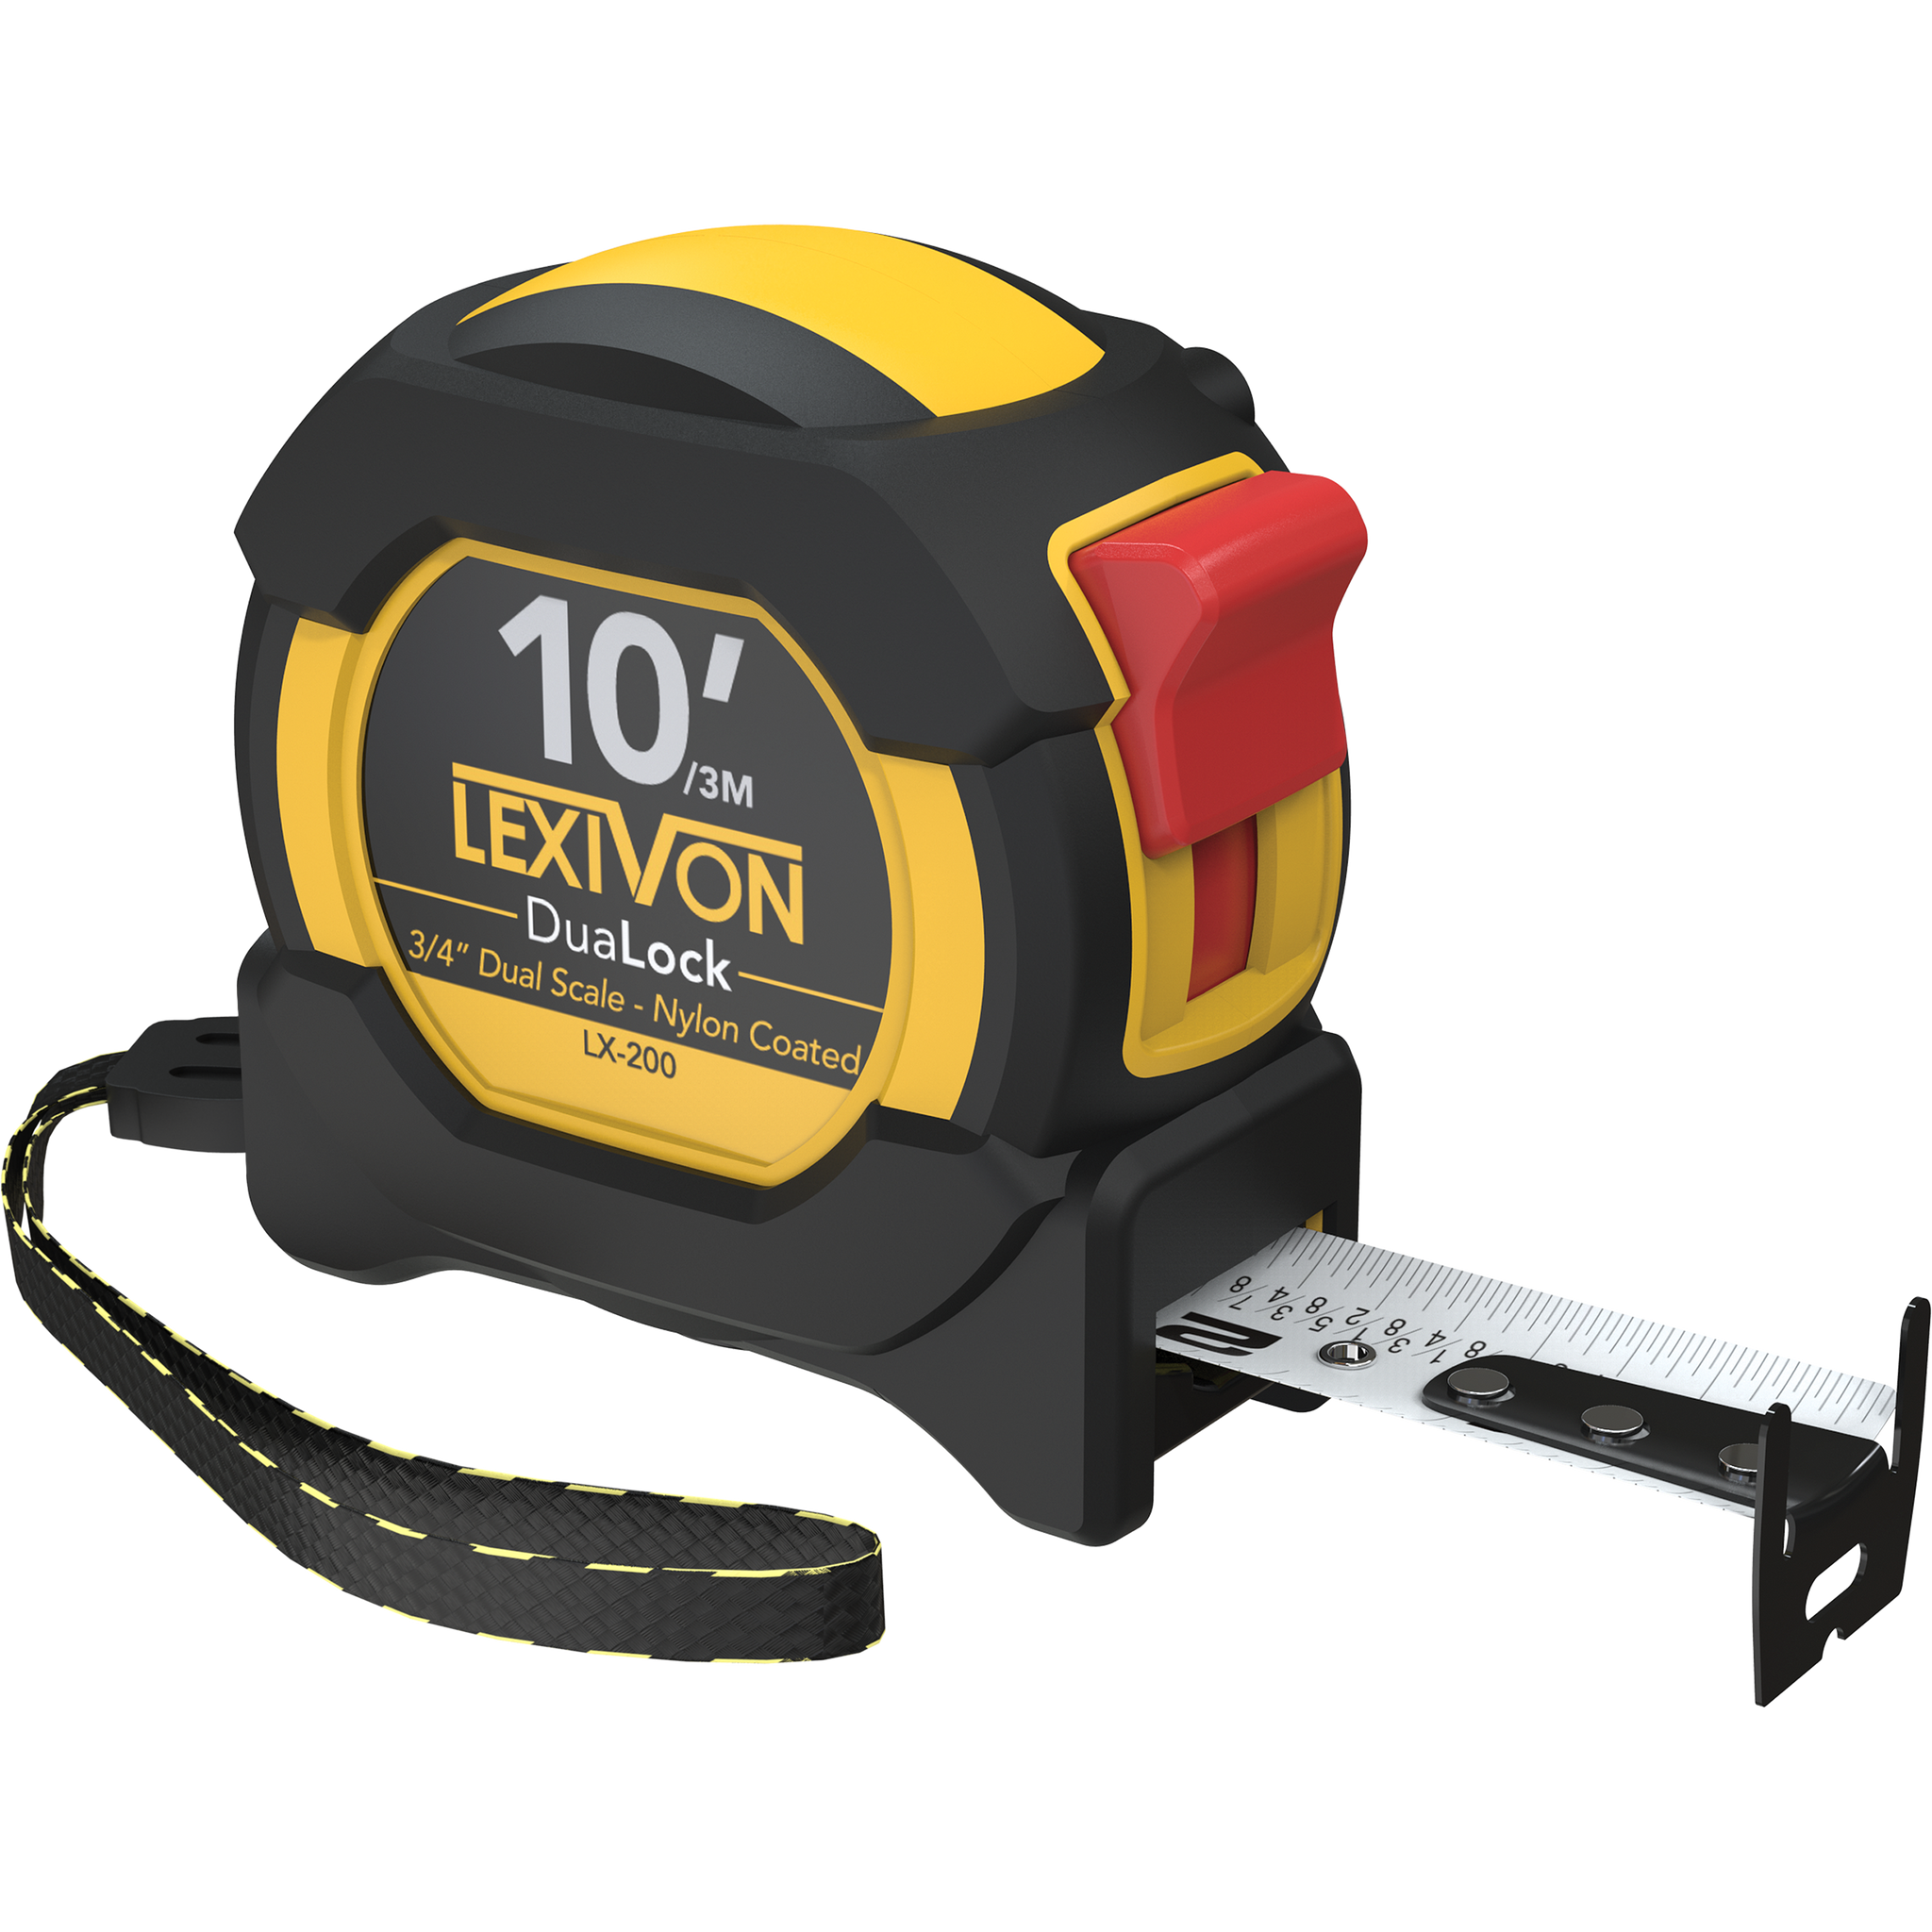 10Ft/3m DuaLock Tape Measure | 3/4-Inch Wide Blade with Nylon Coating, Matte Finish White & Yellow Dual Sided Rule Print | Ft/Inch/Fractions/Metric (LX-200)